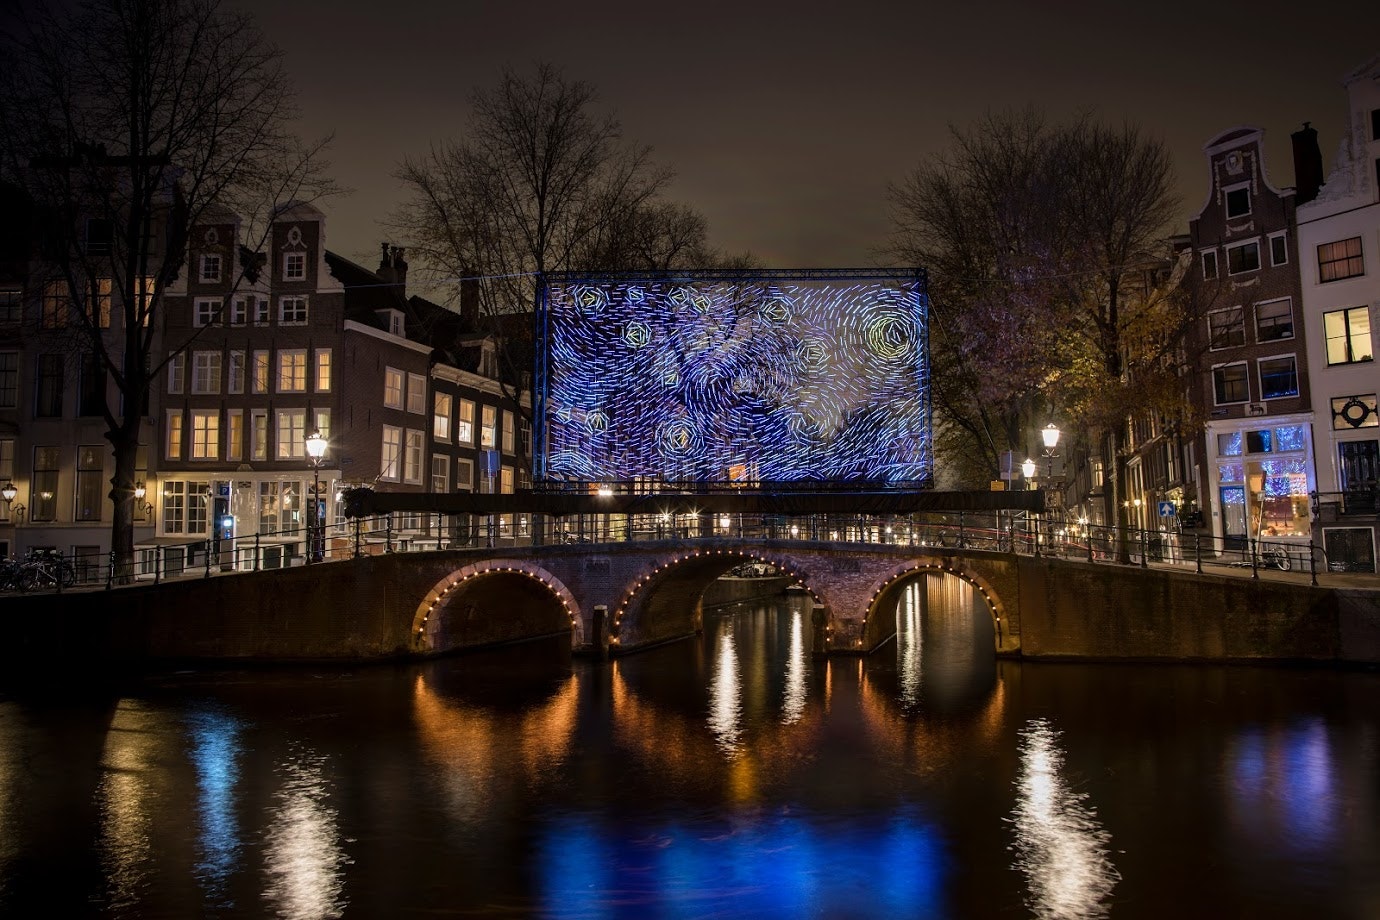 Travel News - Van Gogh’s Starry Night comes to life in Amsterdam